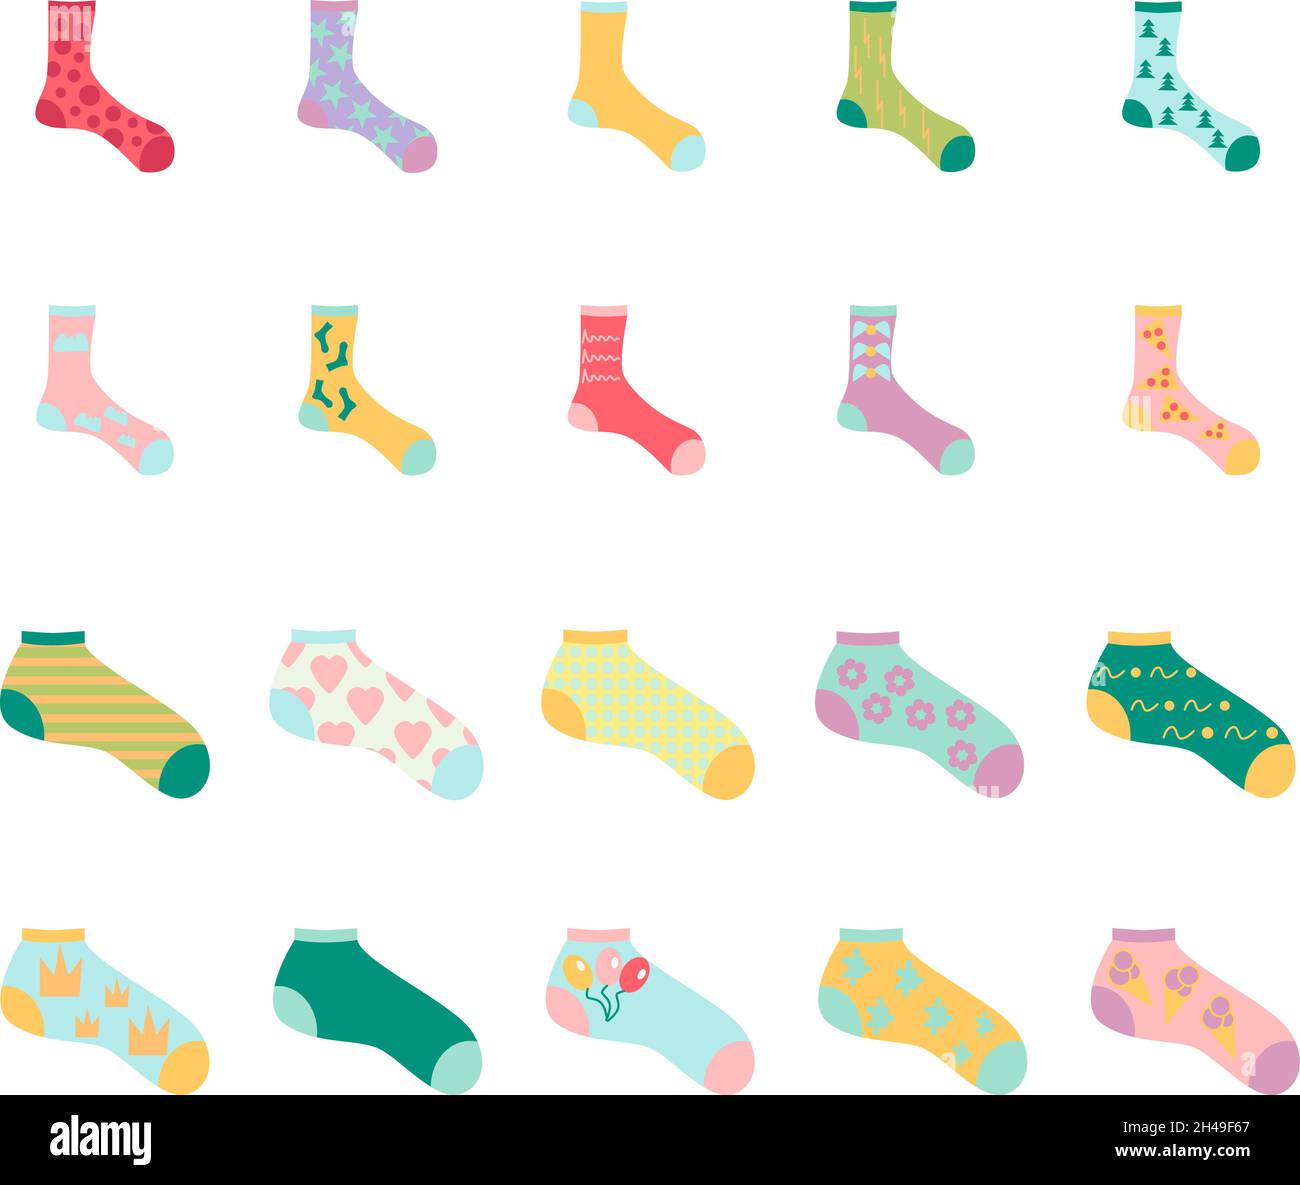 Colorful socks, illustration, vector, on a white background. Stock Vector